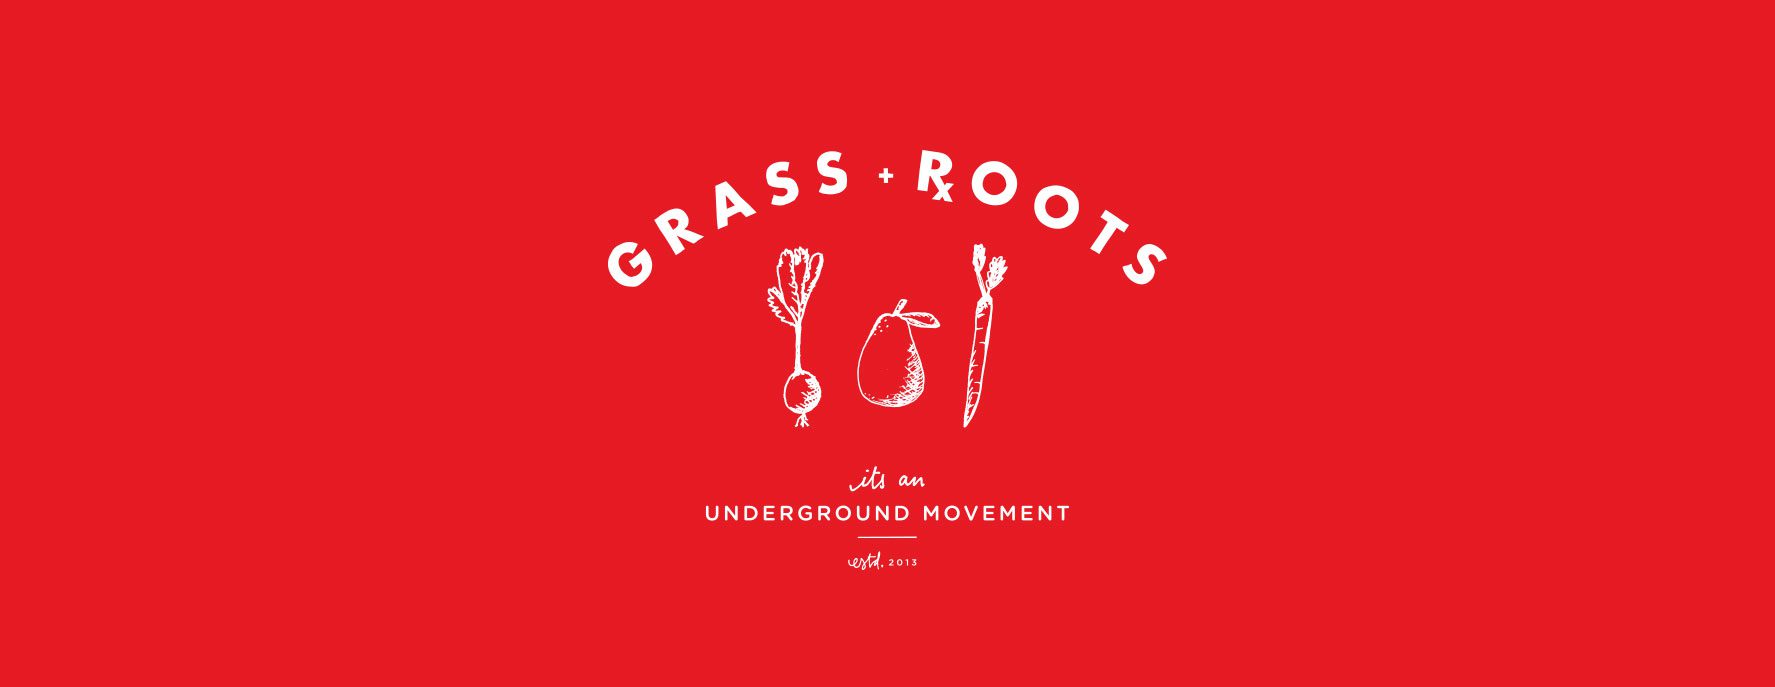 A red background with white lettering that says grass roots and an underground movement.